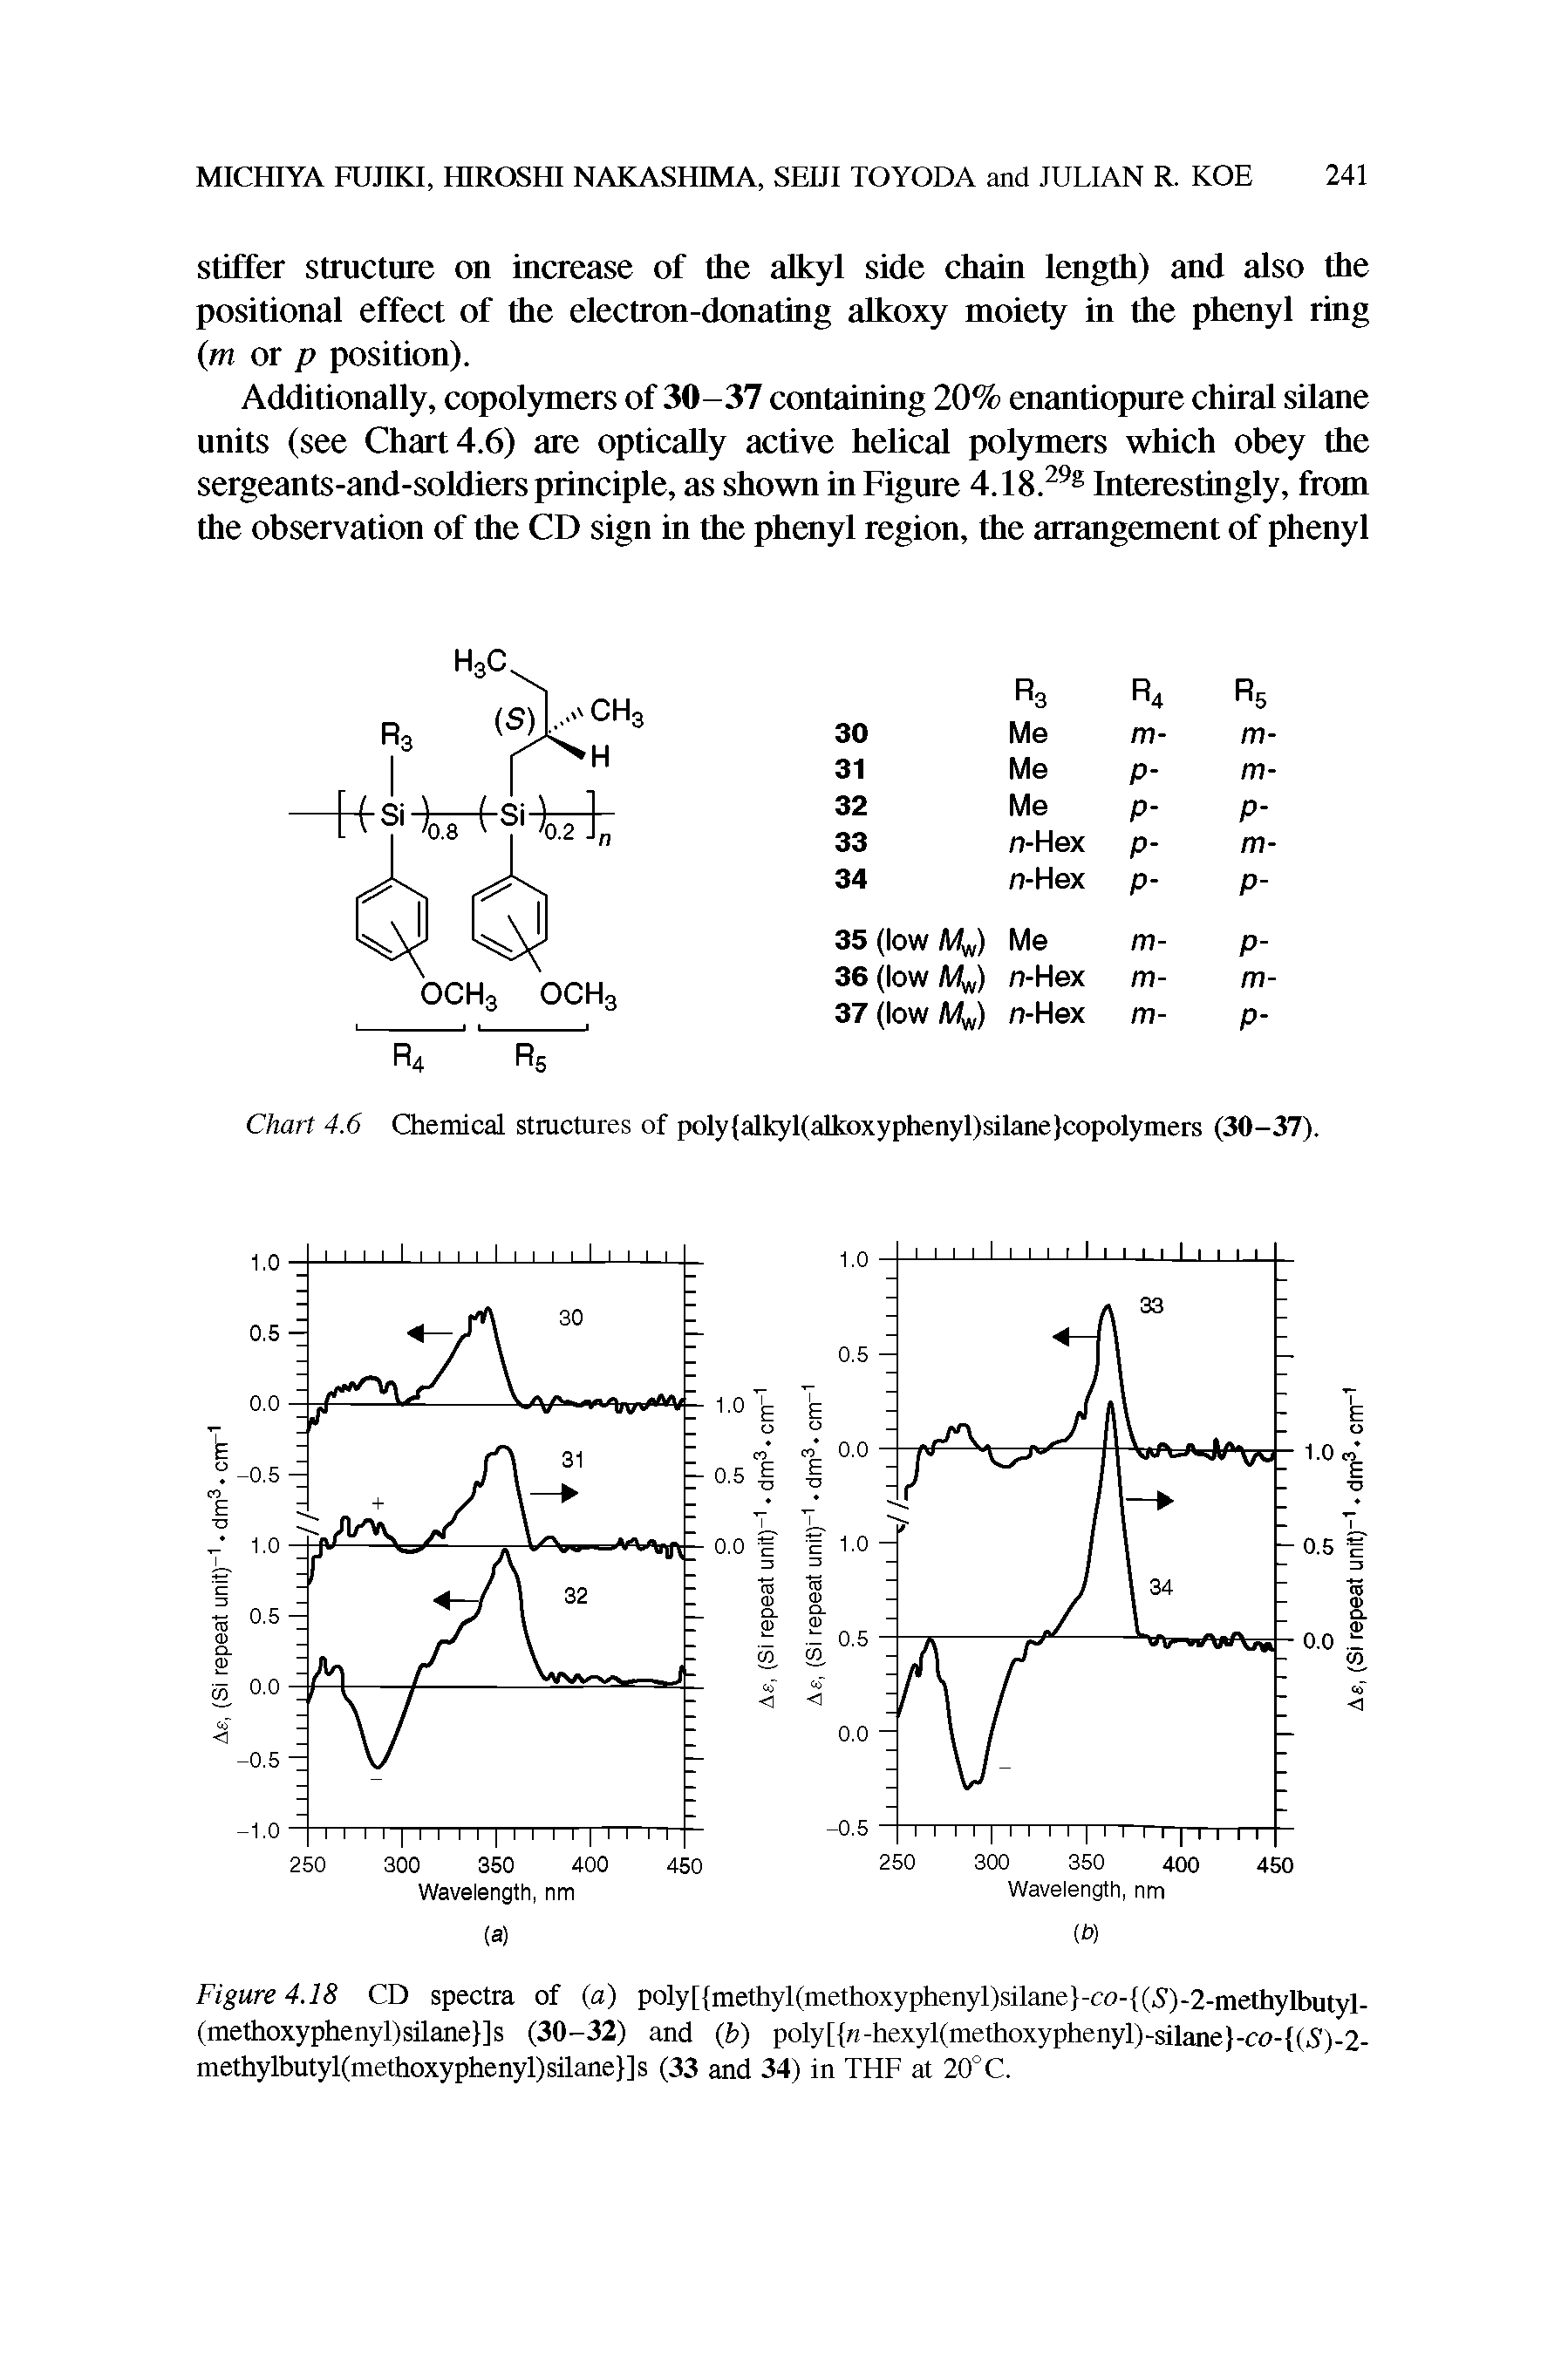 Figure 4.18 CD spectra of (a) poly[ methyl(methoxyphenyl)silane -co- (5 )-2-methylbutyl-(methoxyphenyl)silane ]s (30-32) and (b) poly[ -hexyl(methoxyphenyl)-silane -co- (5)-2-methylbutyl(methoxyphenyl)silane ]s (33 and 34) in THF at 20°C.